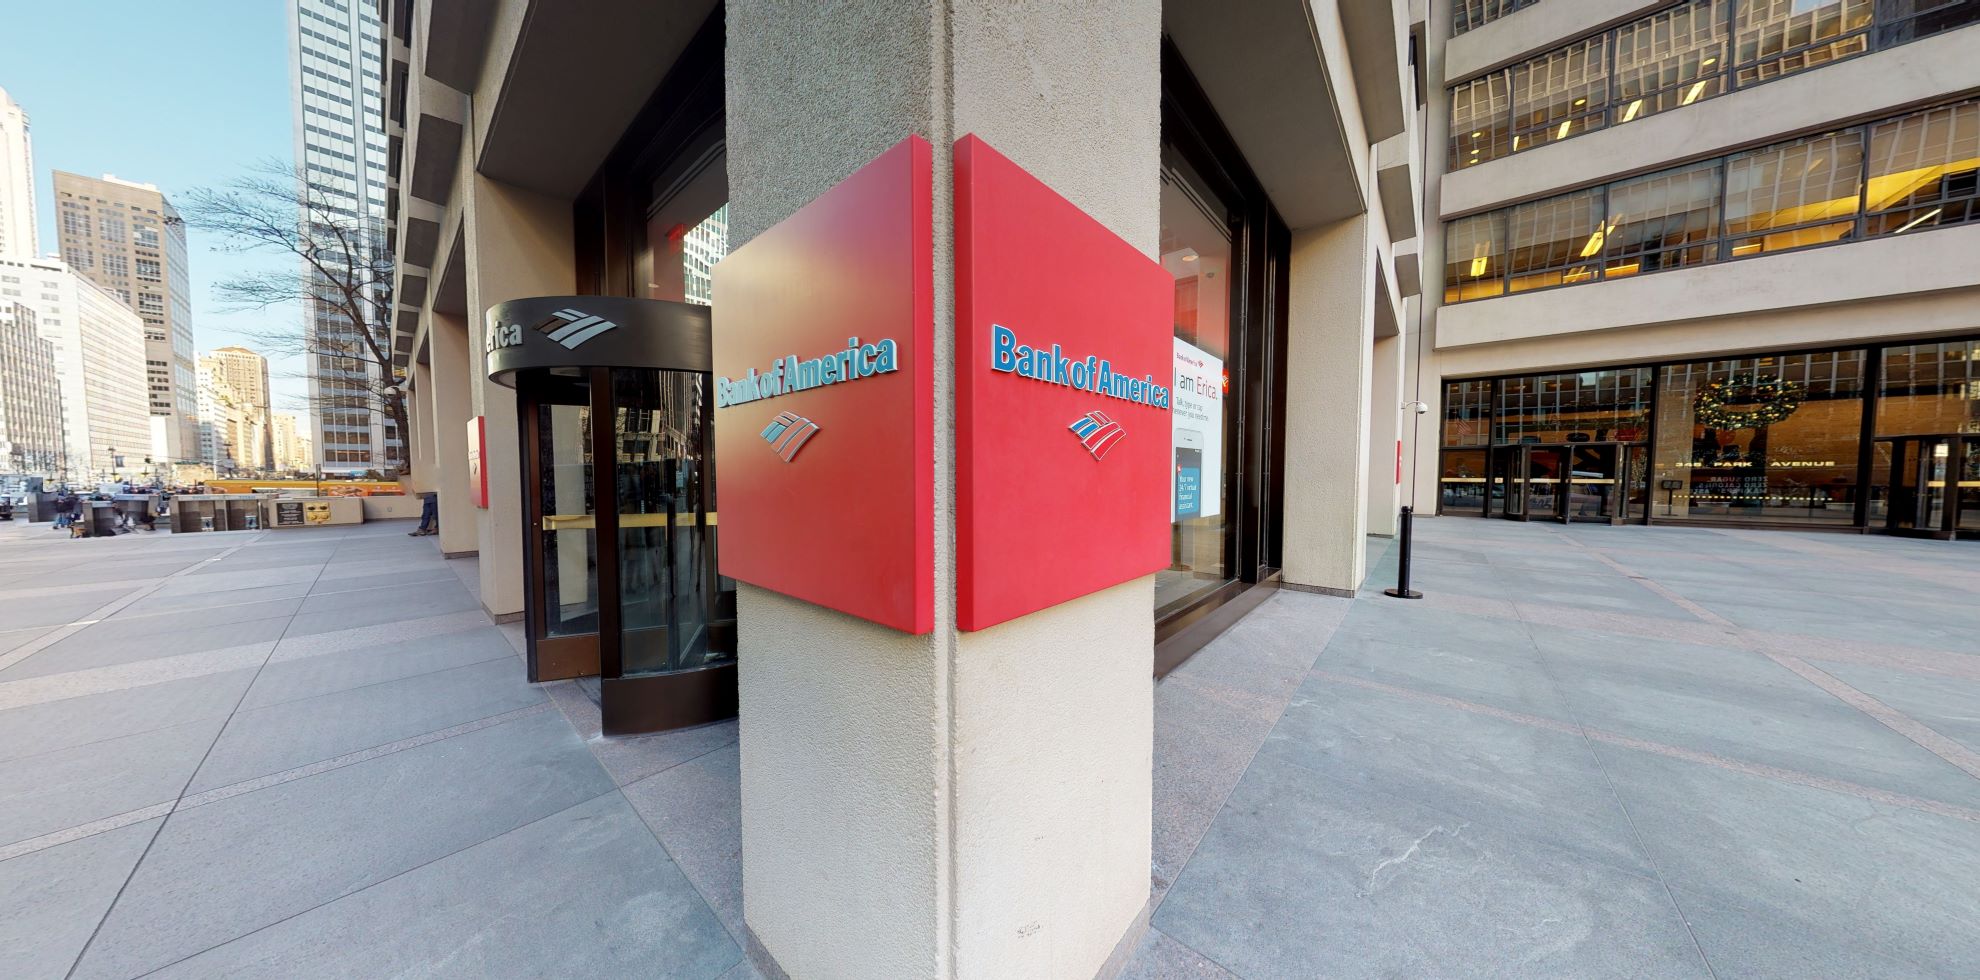 Bank of America financial center with walk-up ATM | 345 Park Ave, New York, NY 10154